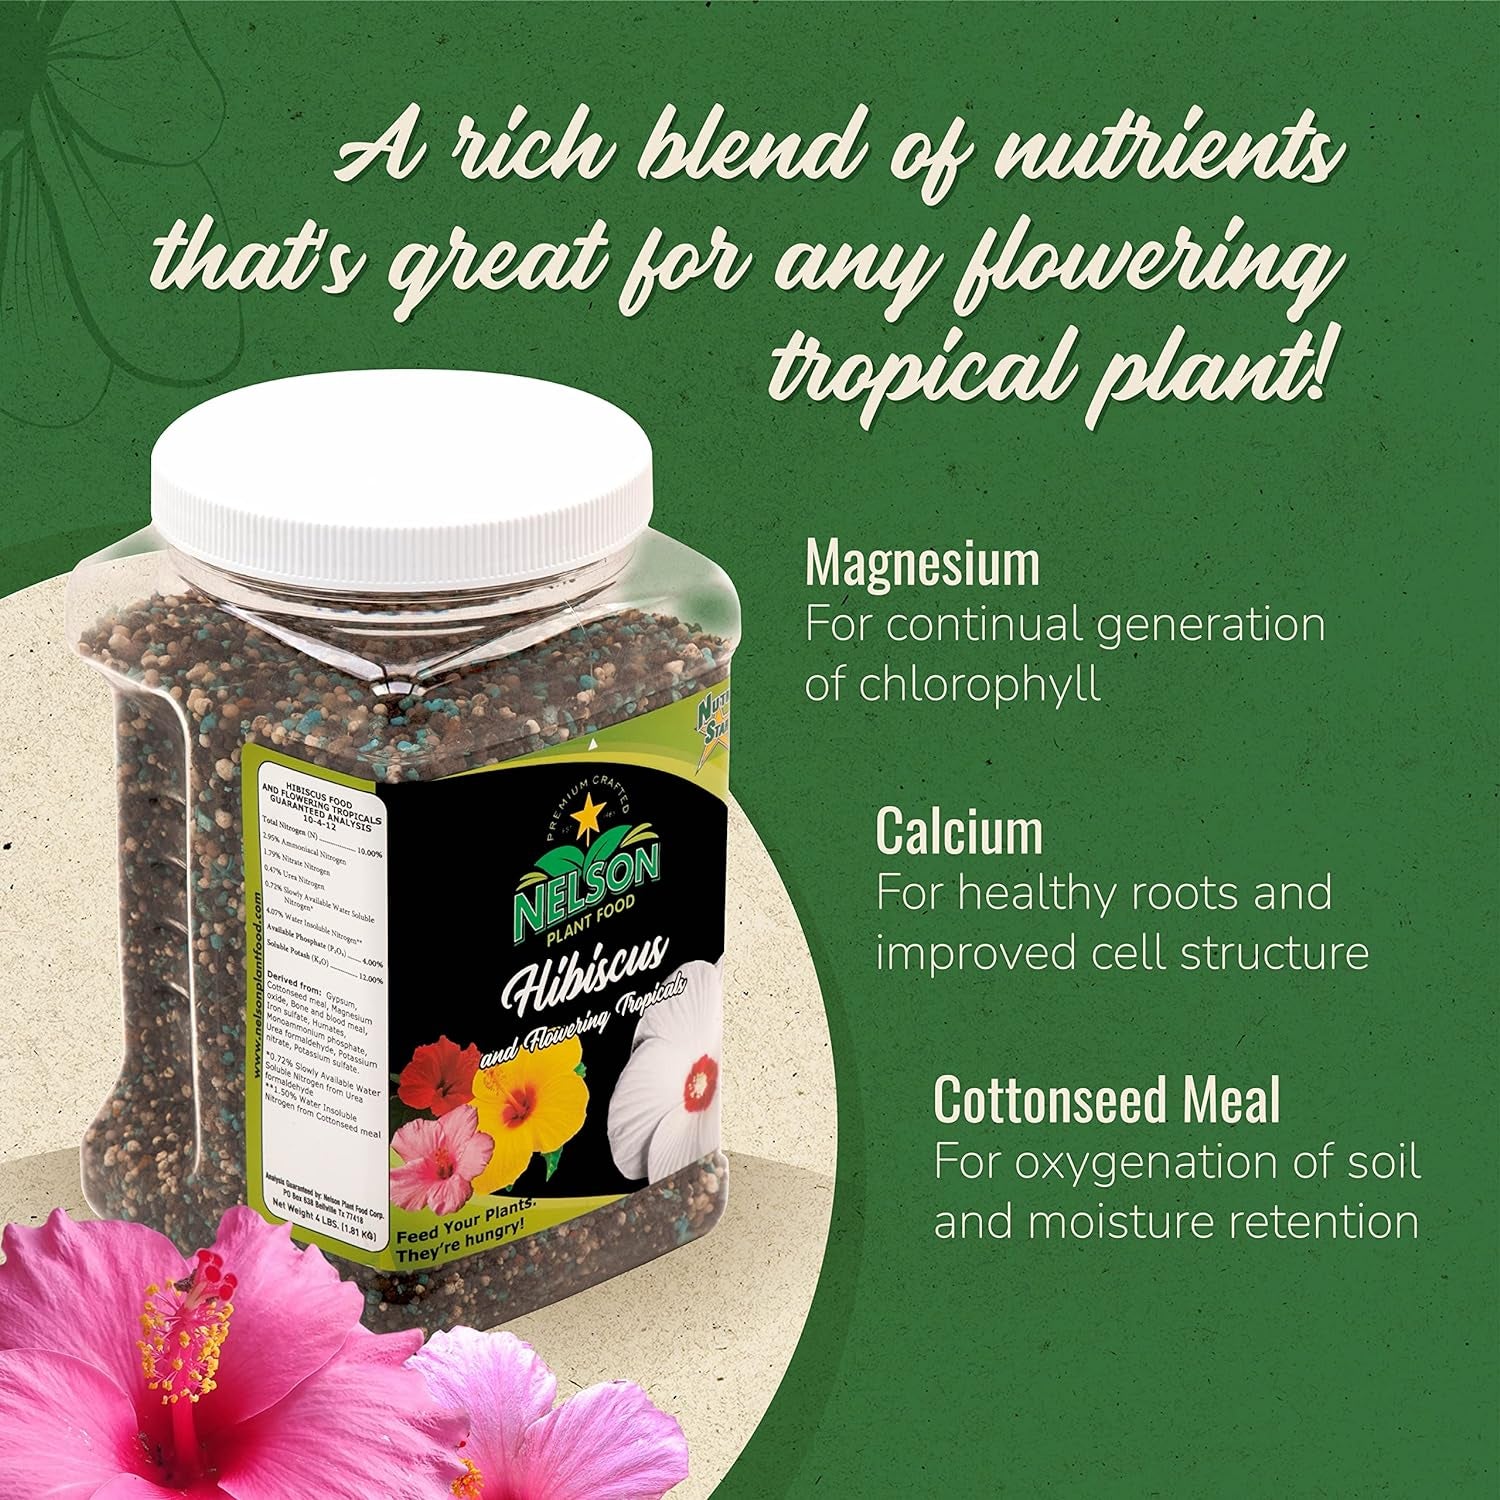 Tropical Hibiscus Fertilizer for All Flowering Tropical Plants